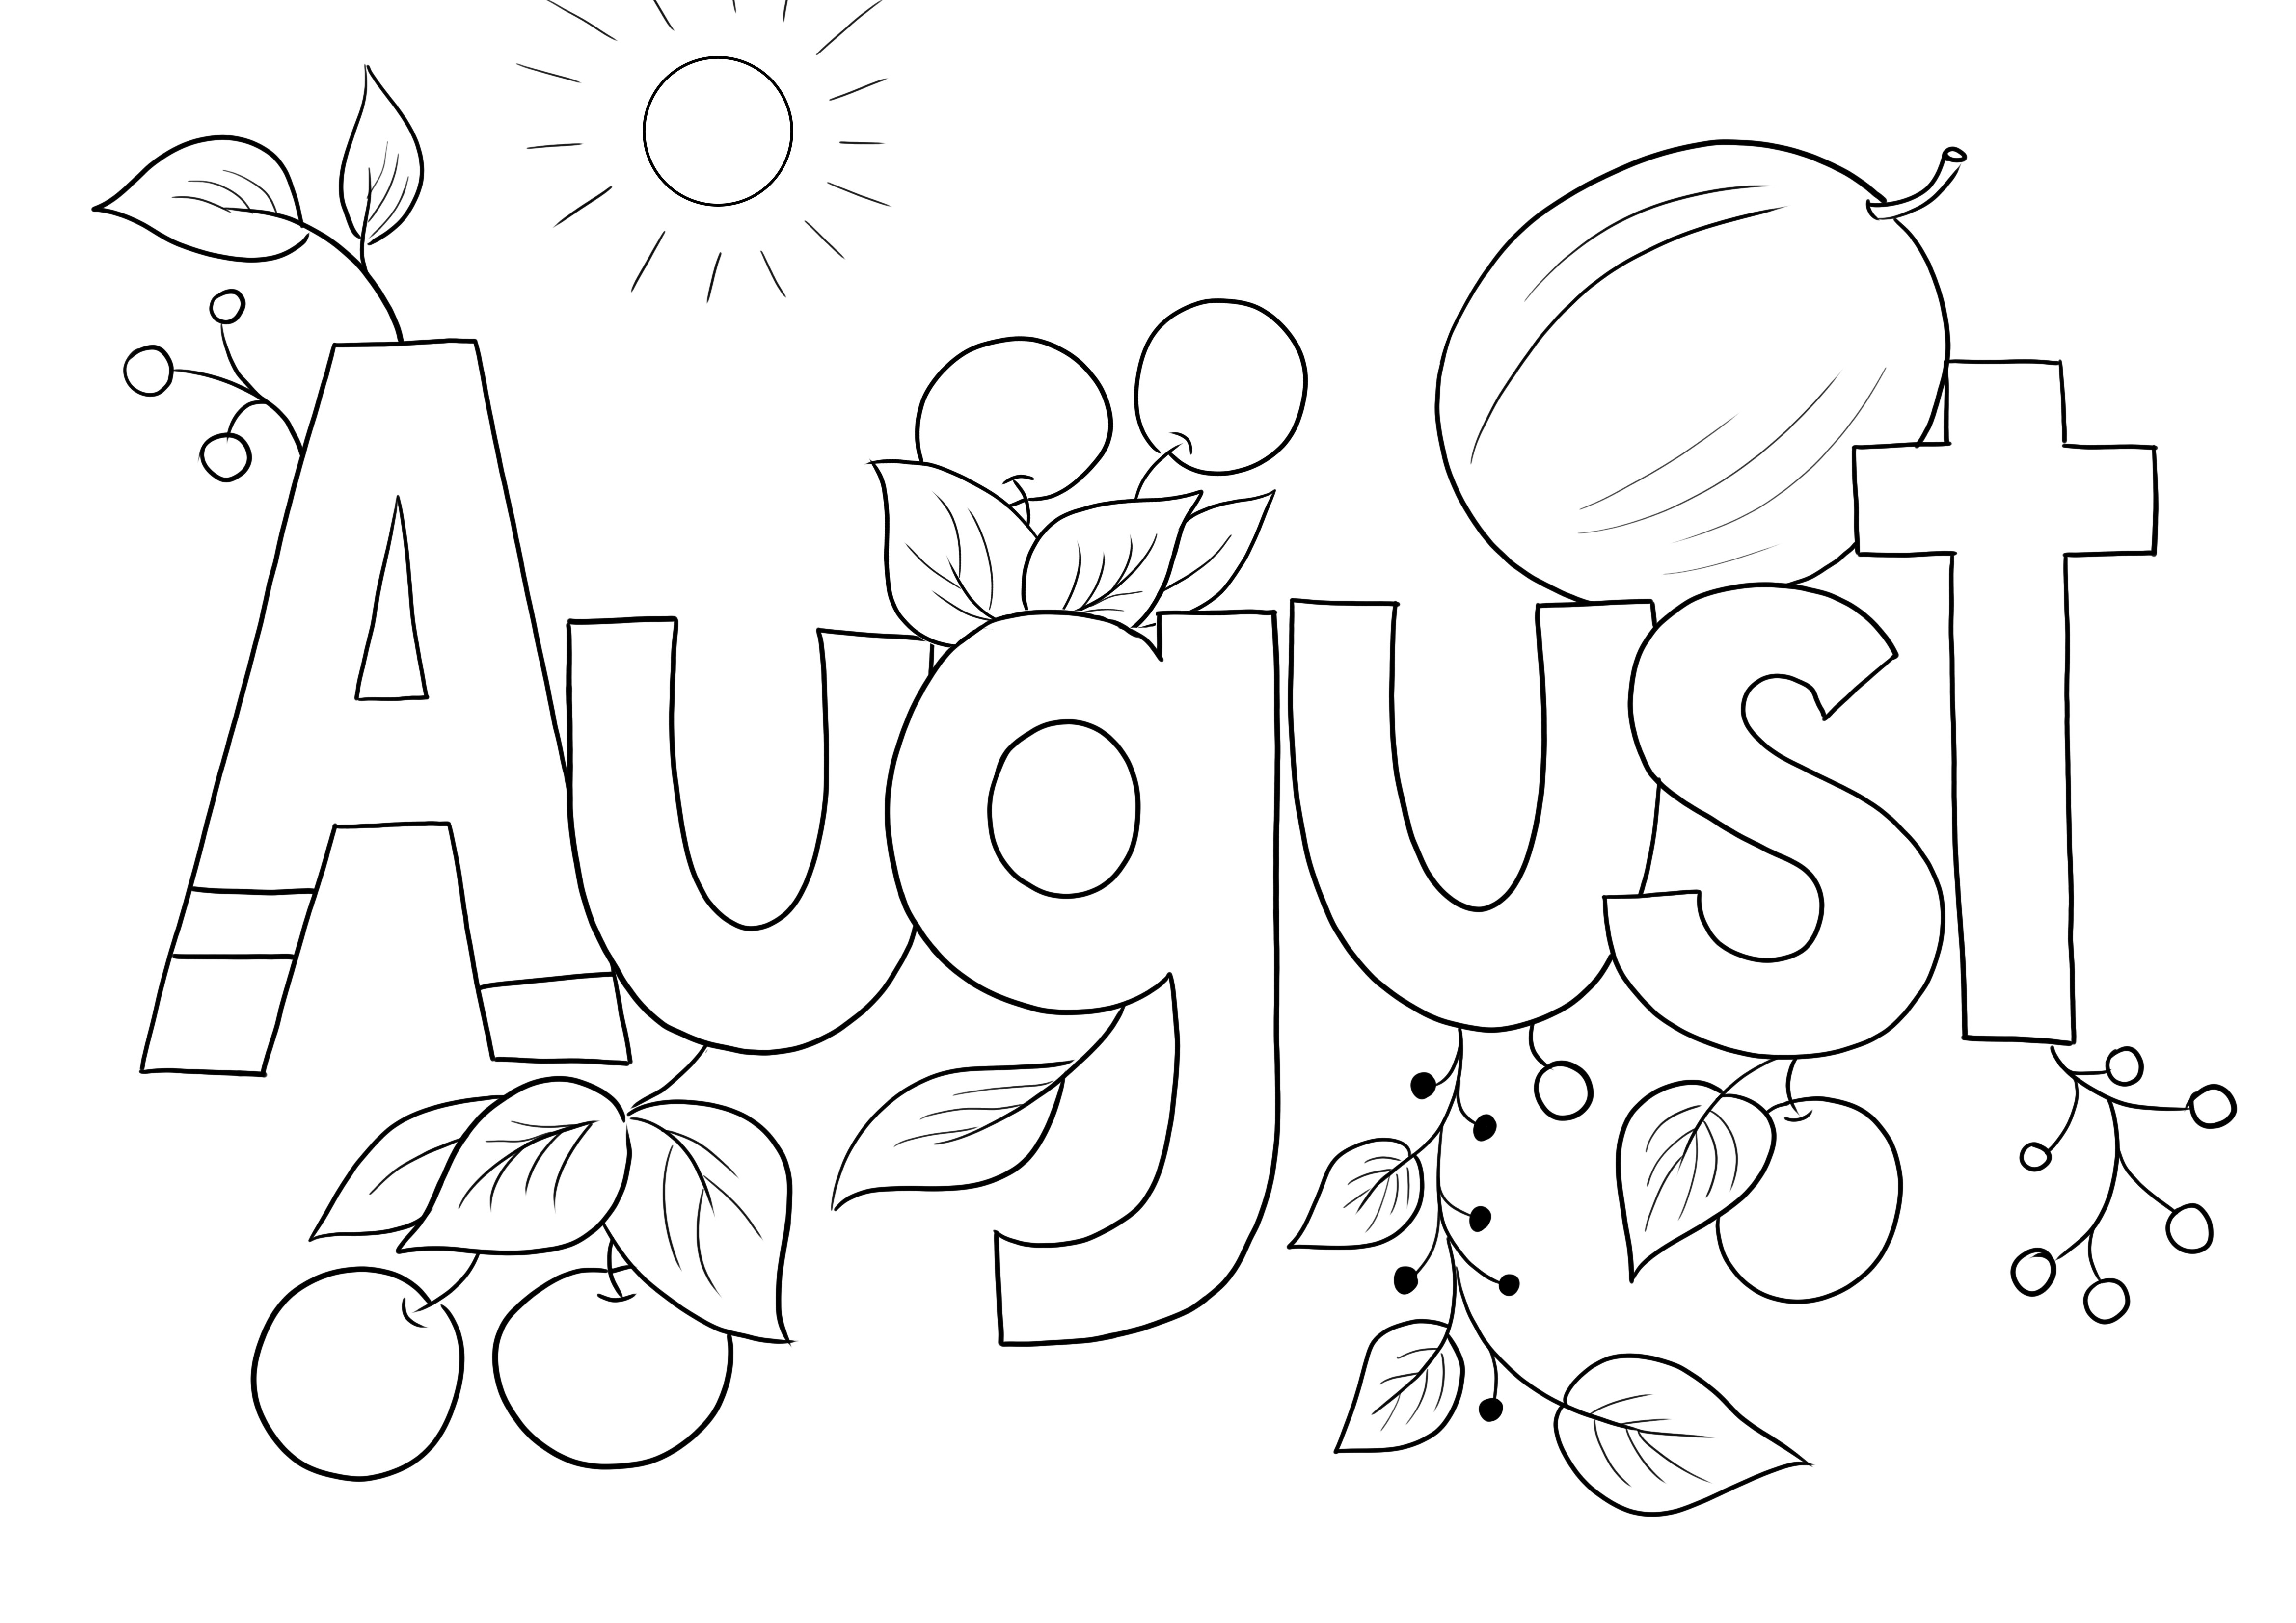 August month to color or print-free